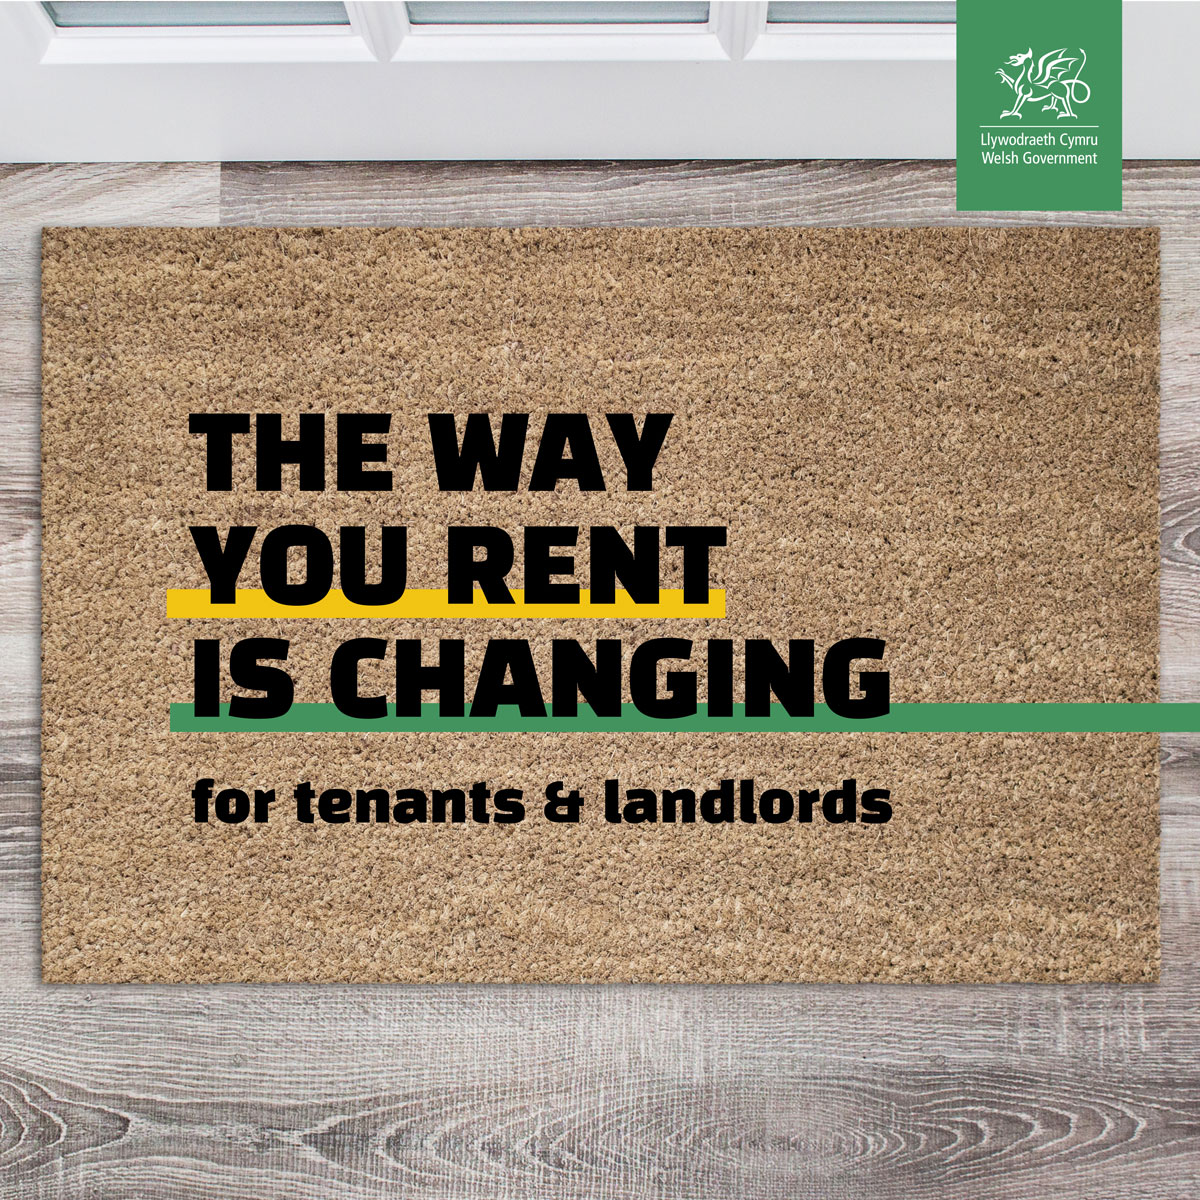 The housing law is changing – what does it mean for our tenants